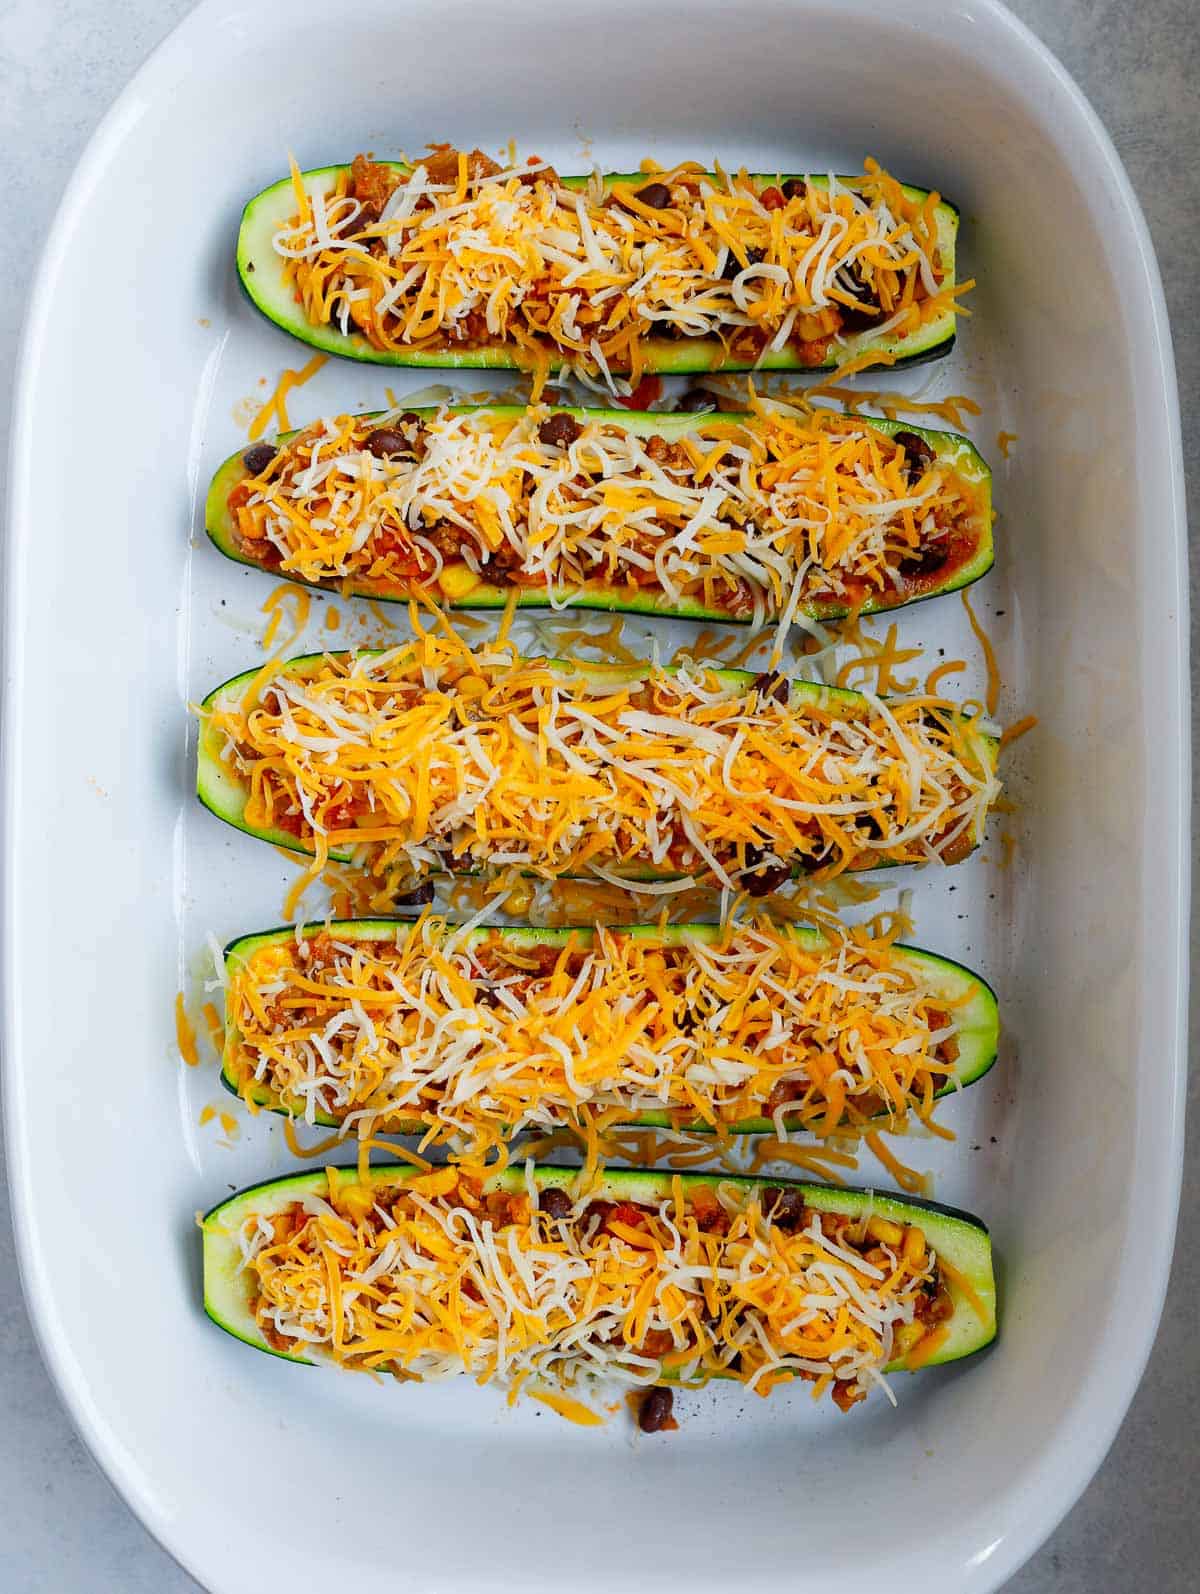 zucchini boats topped with shredded cheese before baking